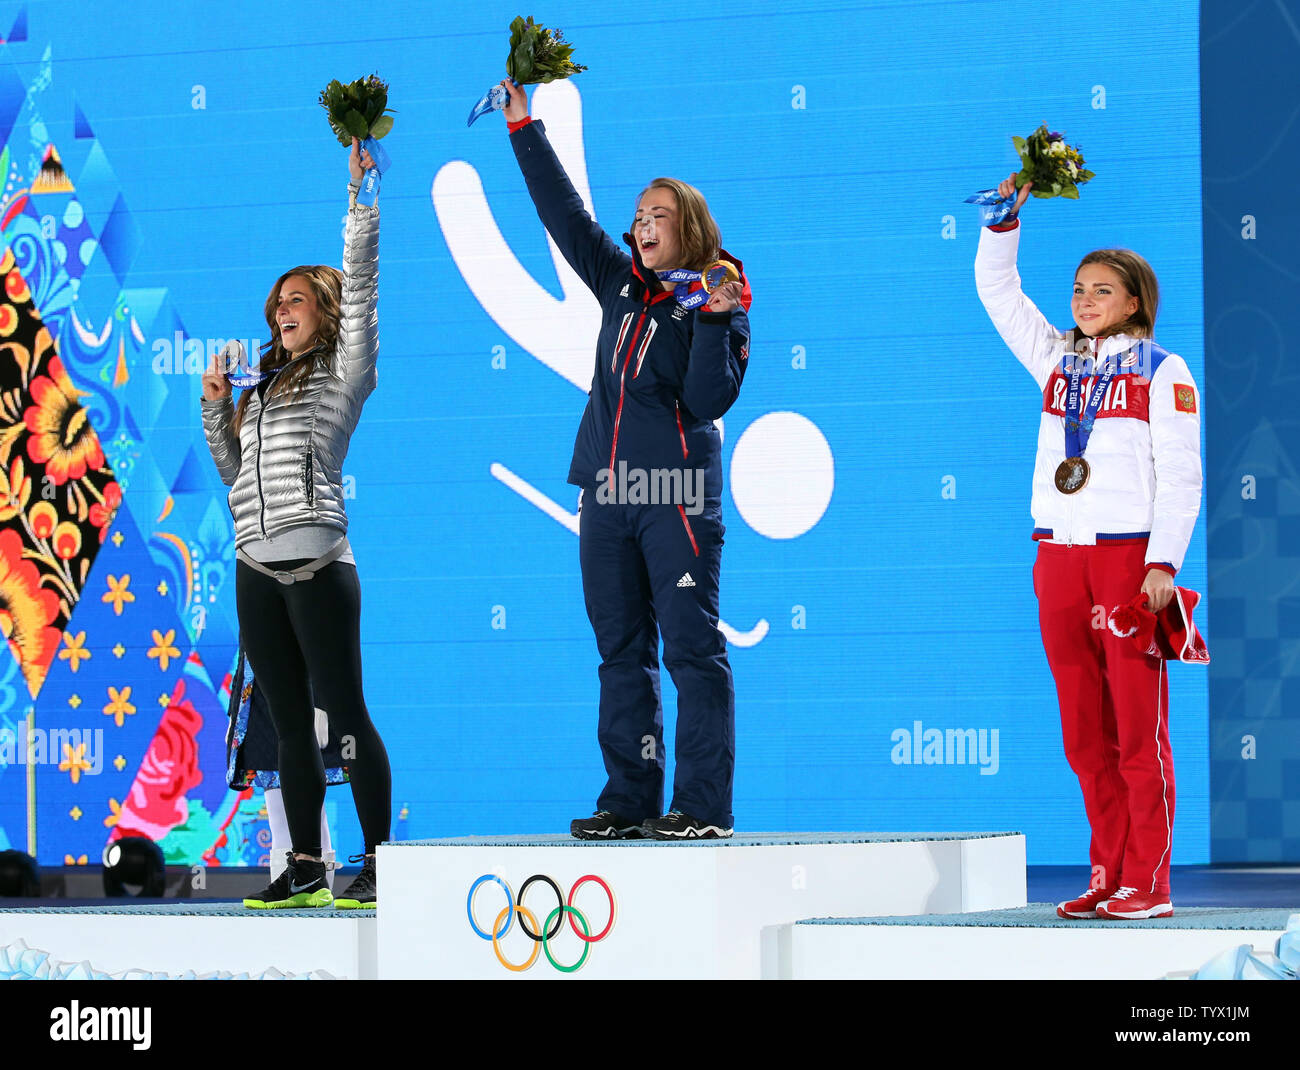 (From L to R) US athlete silver medalist Noelle Pikus-Pace, Great Britain's gold medalist Elizabeth Yarnold and Russia's bronze medalist Elena Nikitina jubilate during the medal ceremony for the women skeleton during the Sochi Winter Olympics on February 15, 2014.  UPI/Maya Vidon-White Stock Photo